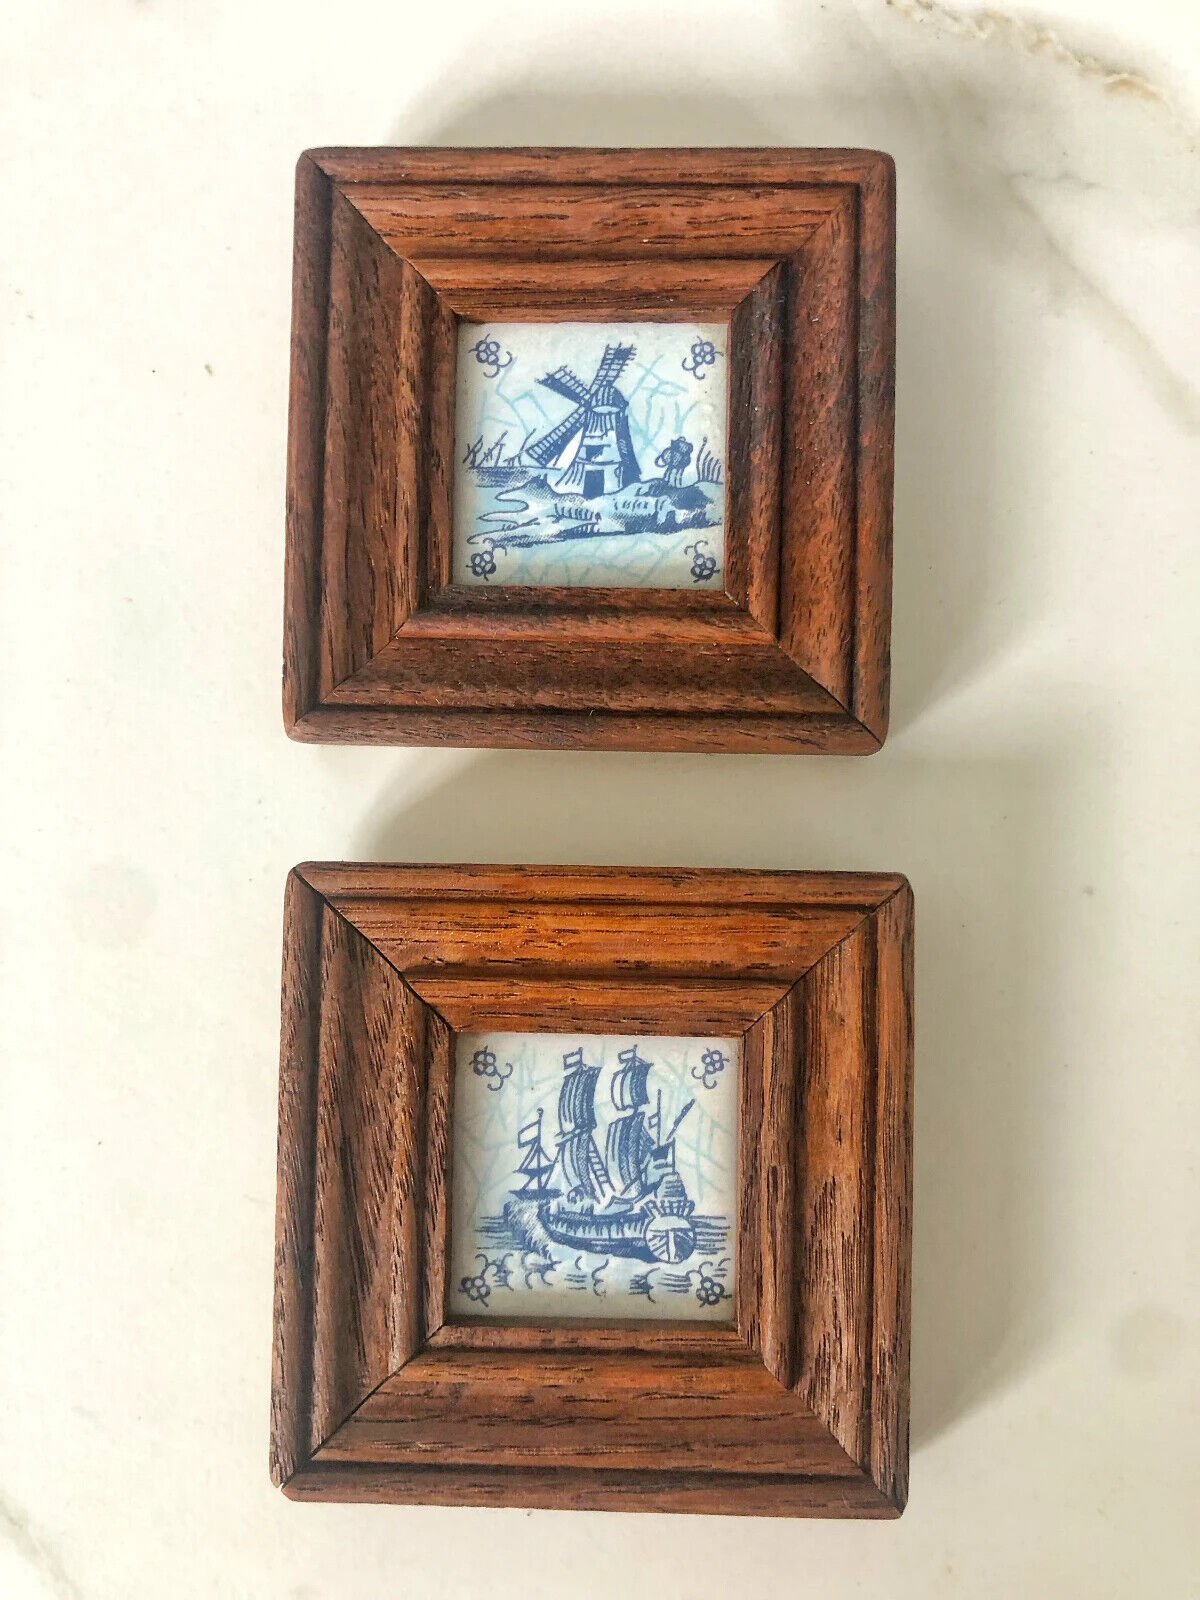 Delft Blue framed tiles, hand made and painted, windmill and ship themed